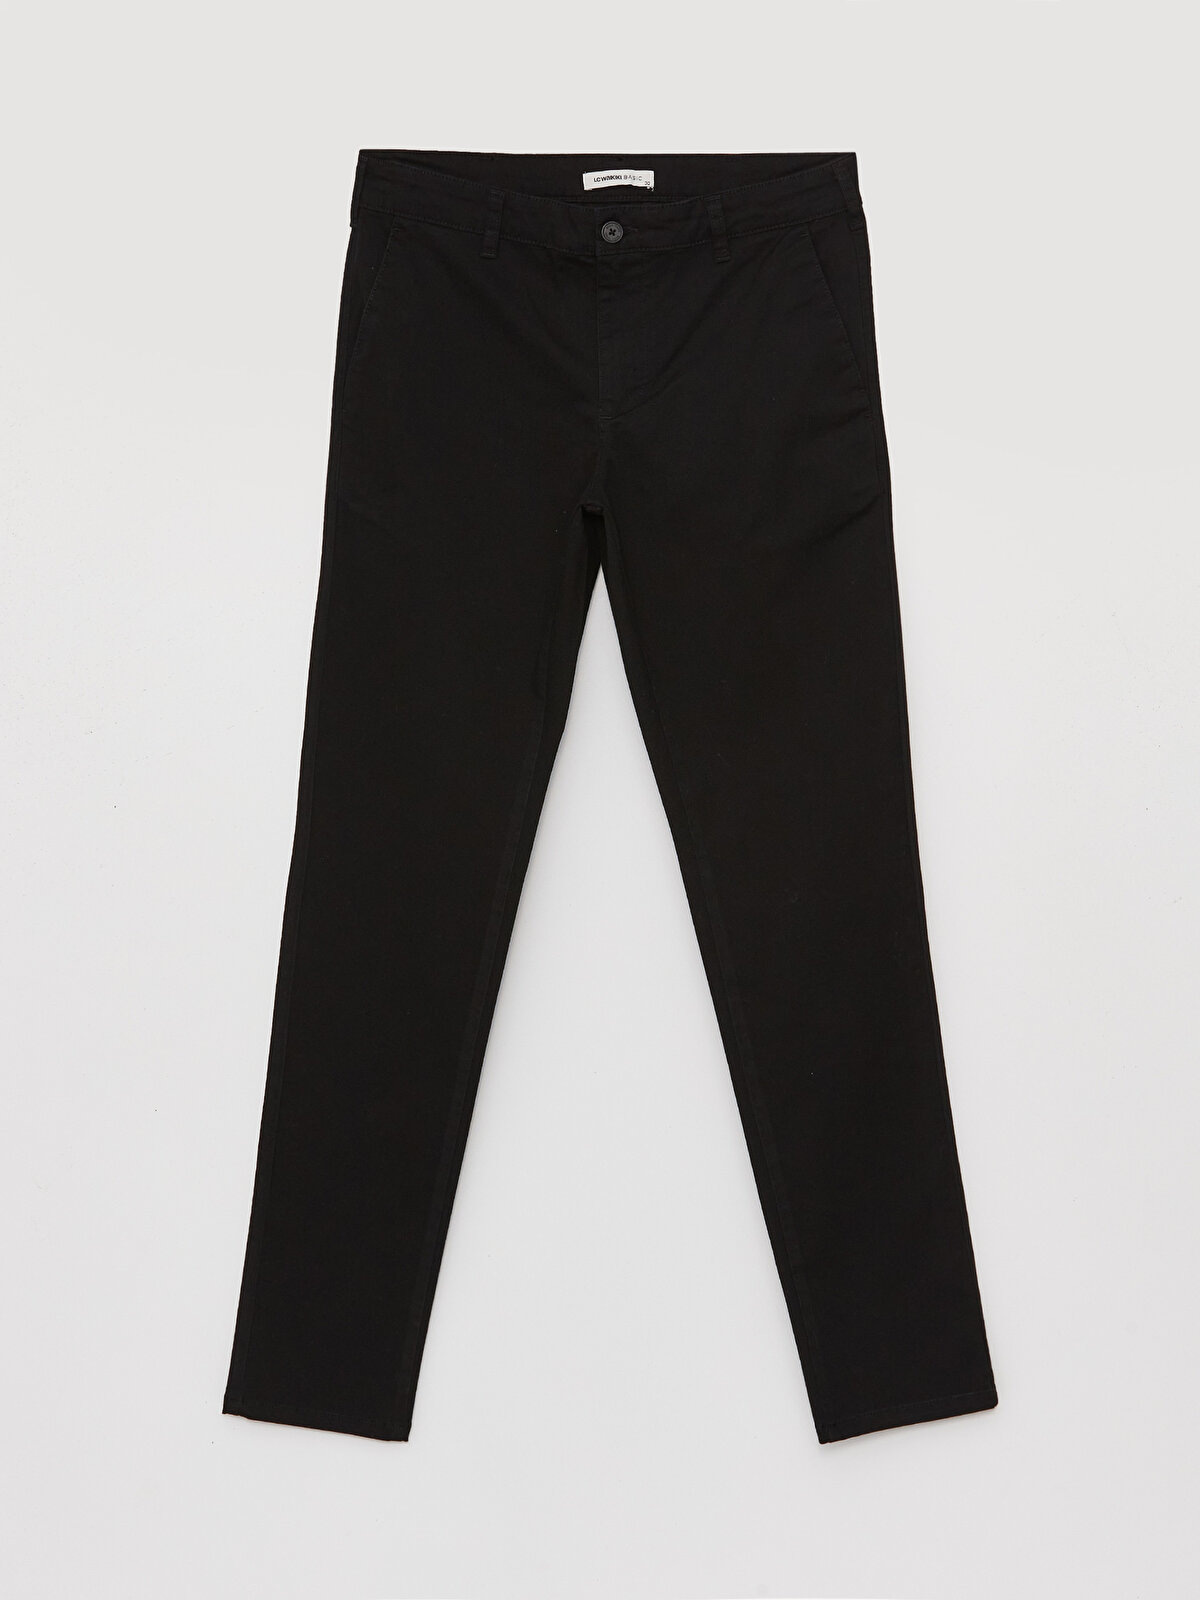 Buy Black Skinny Fit Stretch Chinos Trousers from Next India